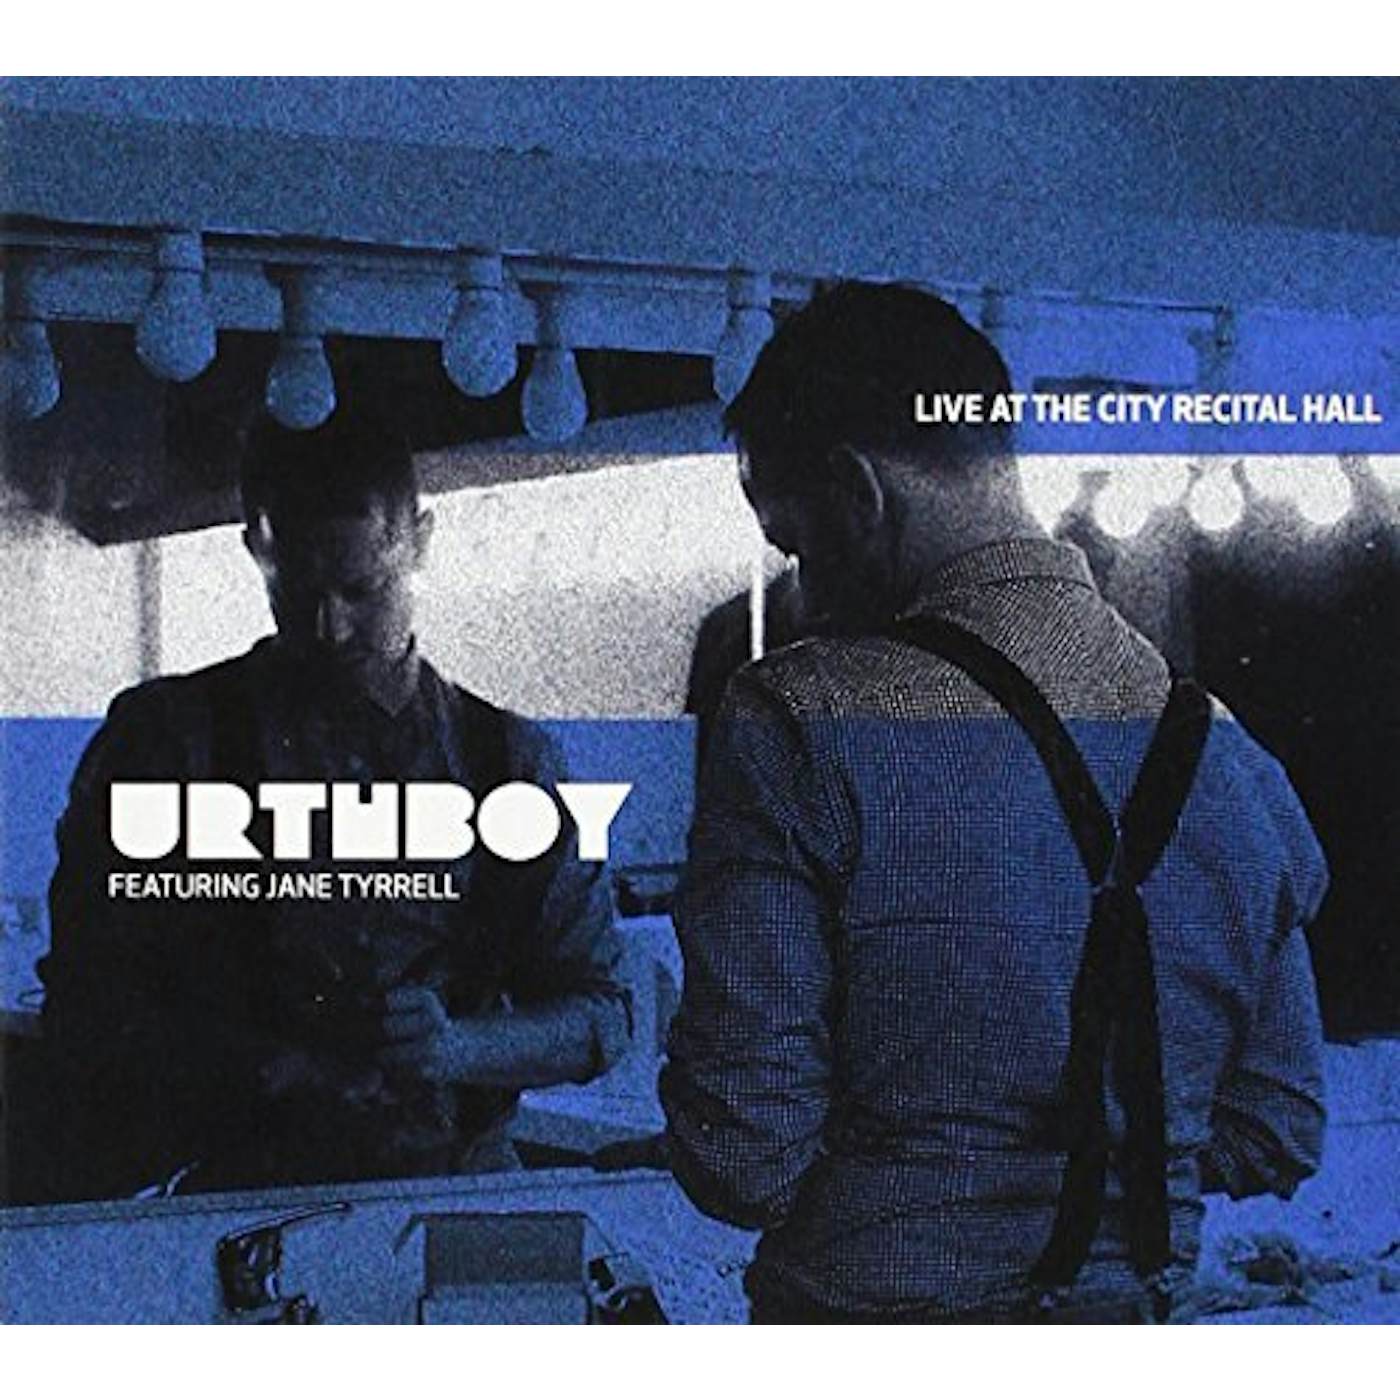 Urthboy LIVE AT THE CITY RECITAL HALL CD